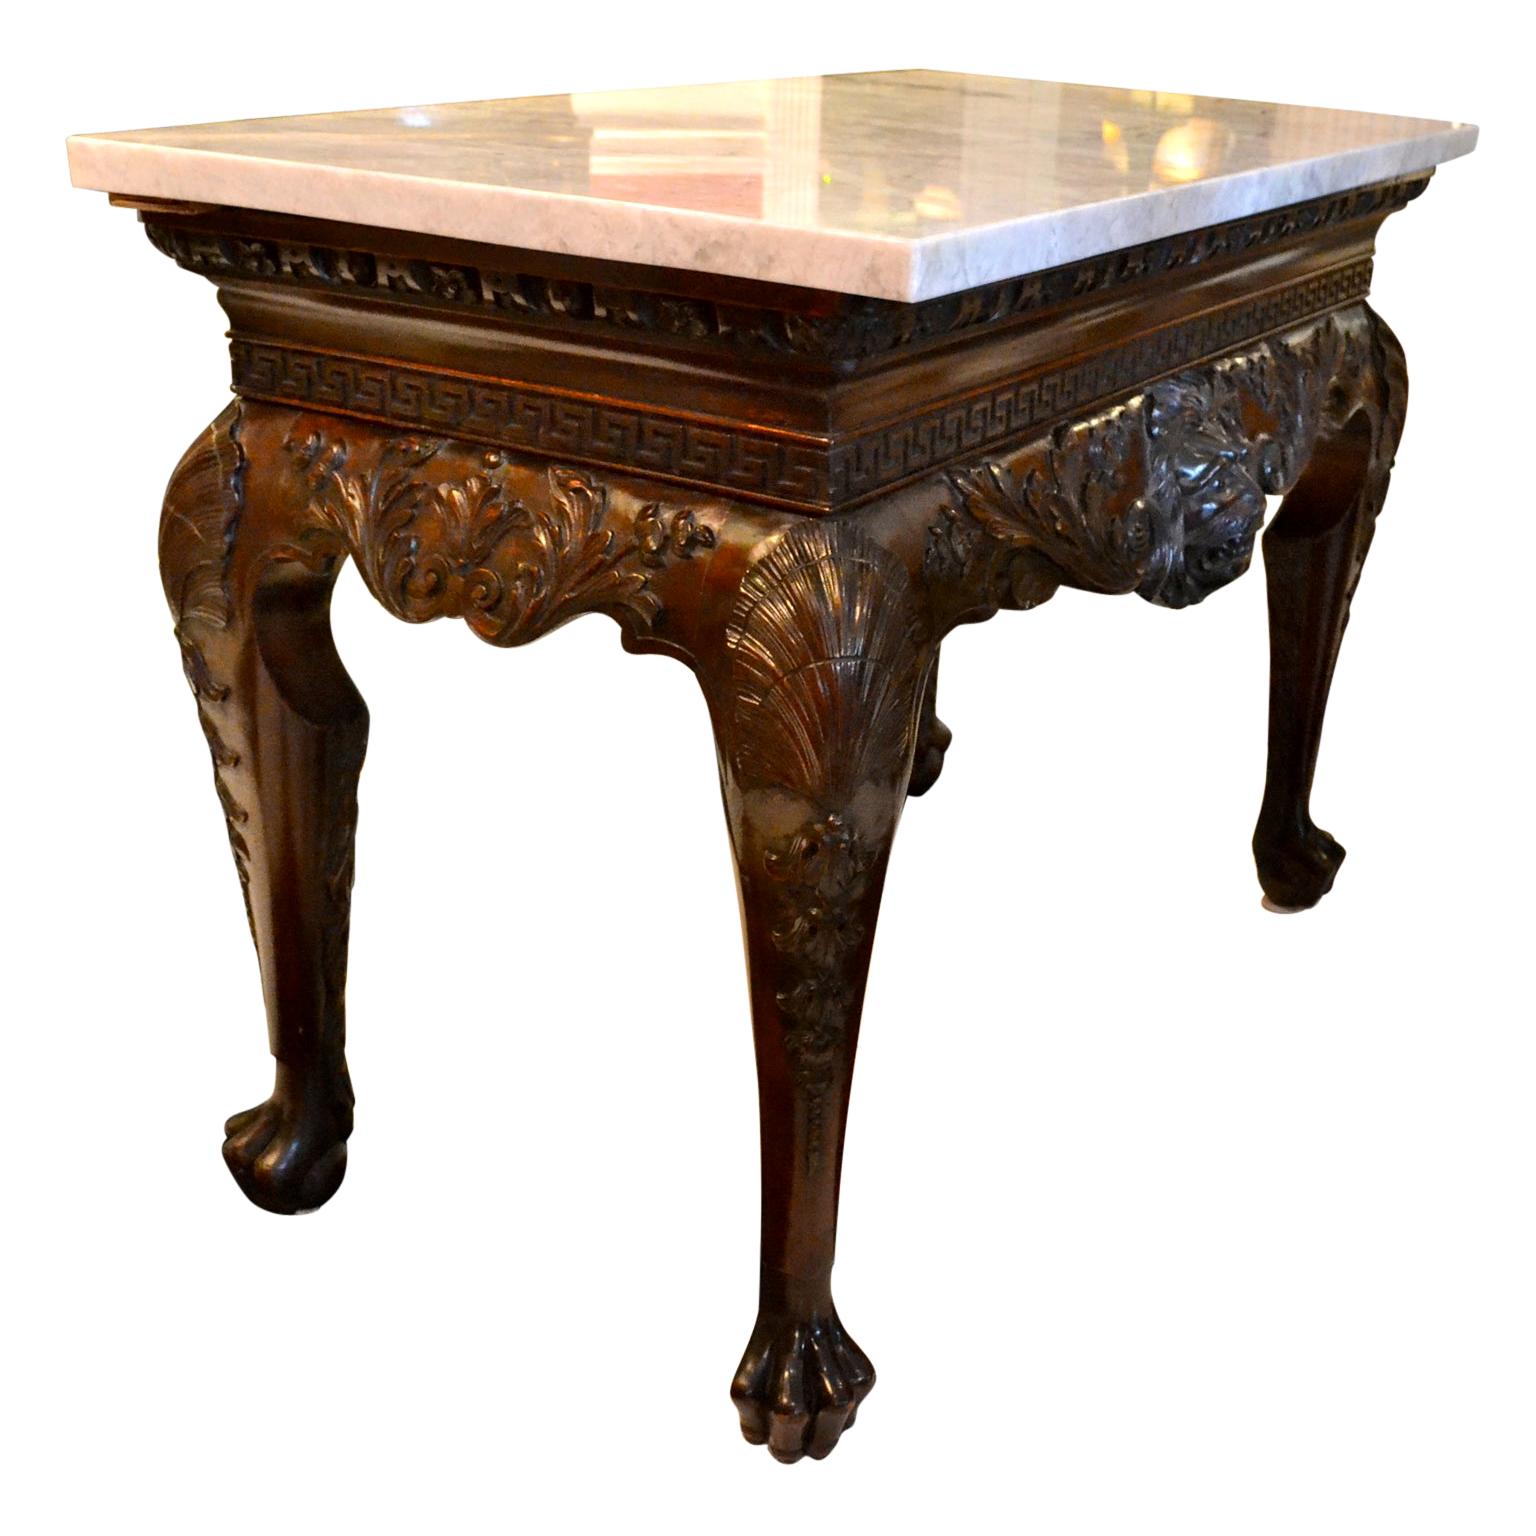 19th Century Irish Chippendale Style Marble-Topped Mahogany Centre Hall Table